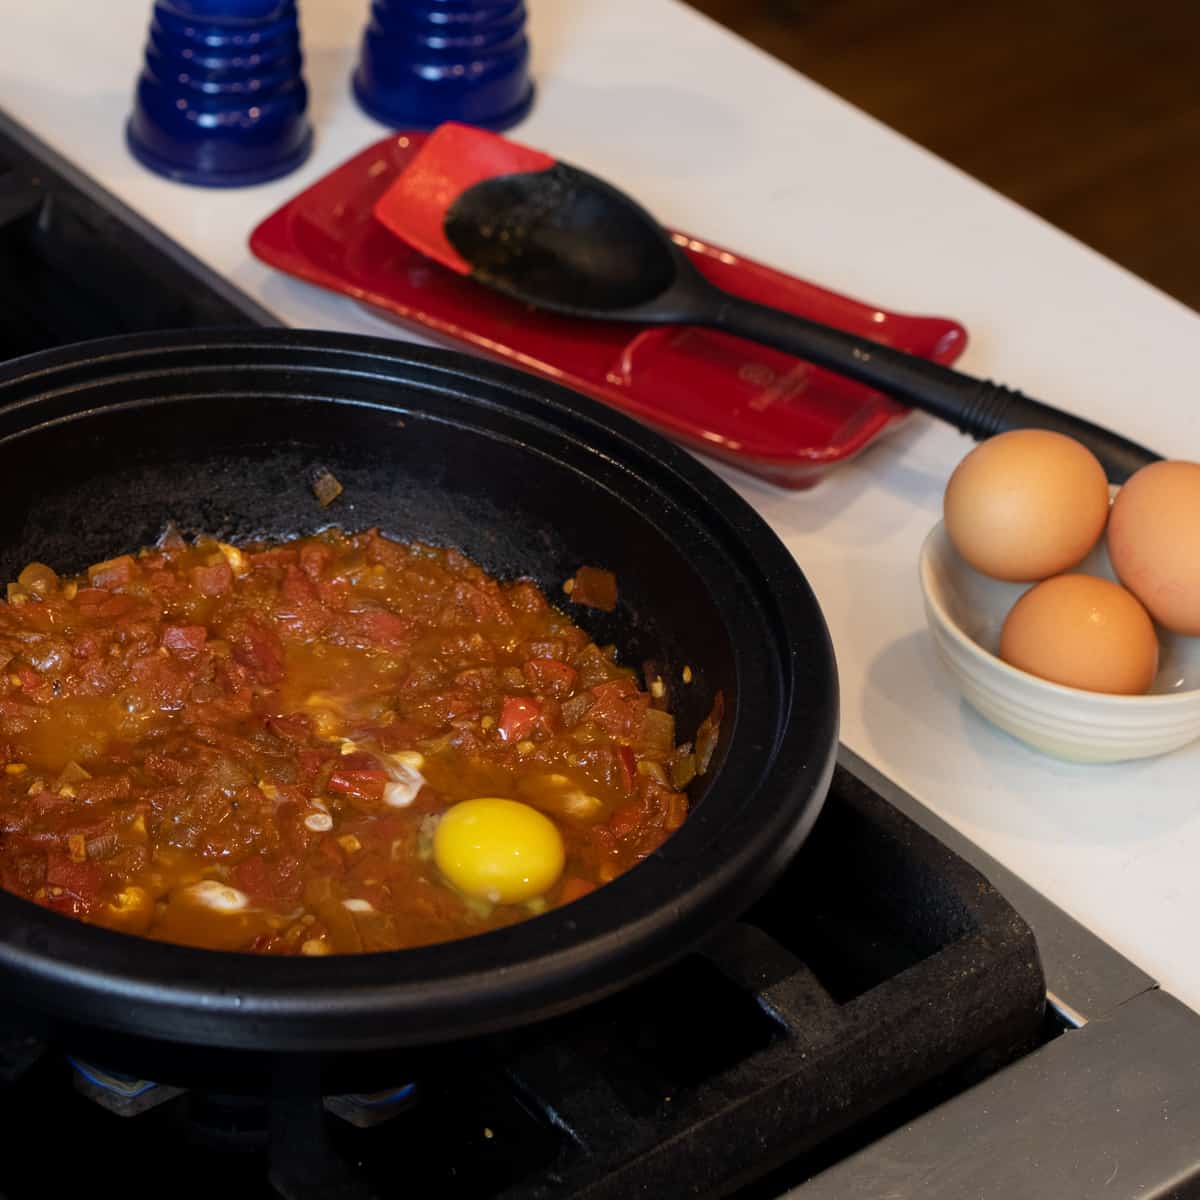 An egg freshly cracked on tomatoes simmering in a tagine base.